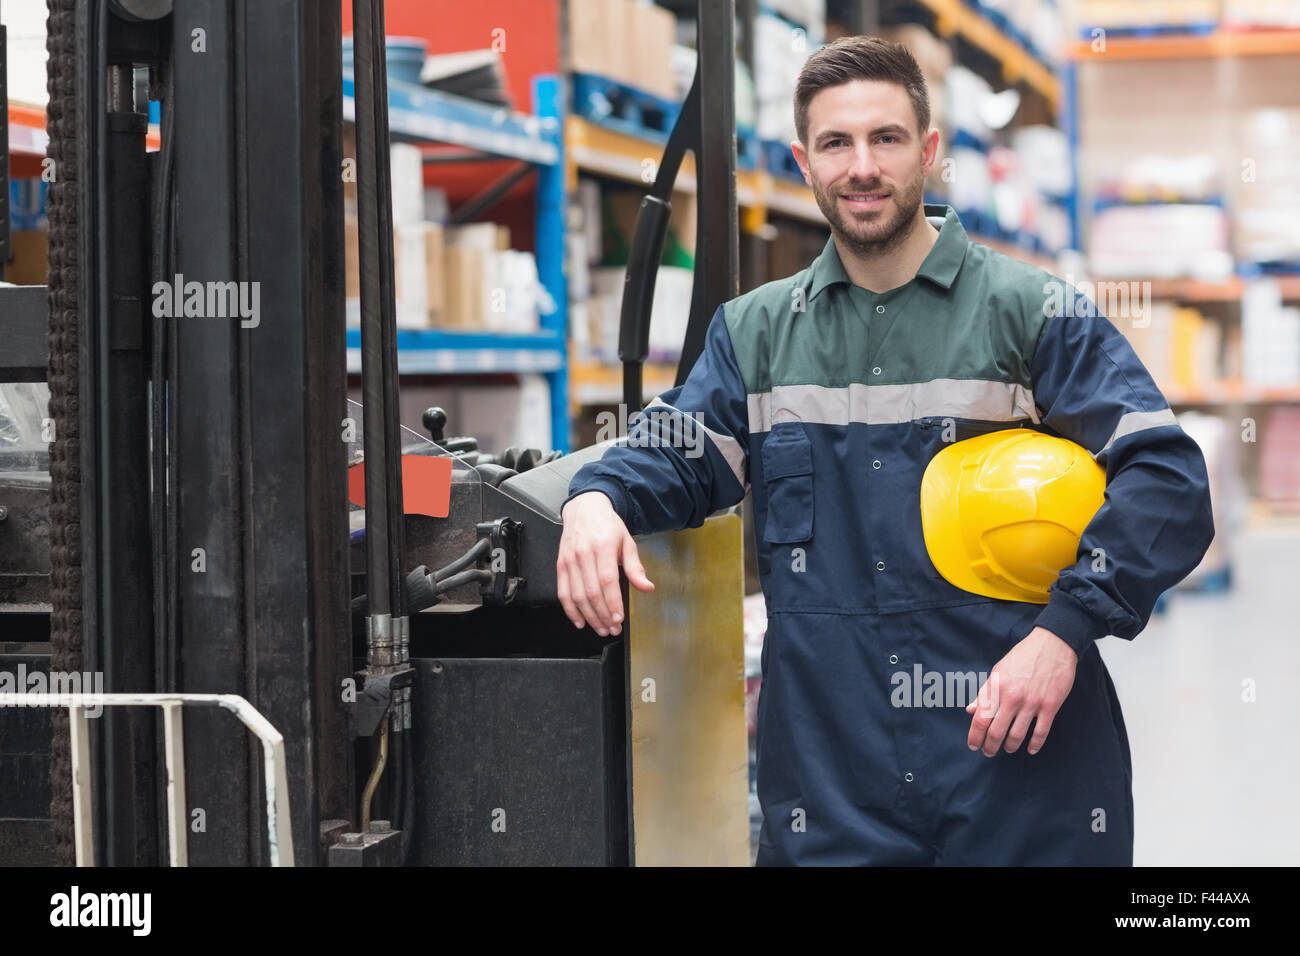 Manual worker leaning against the forklift Stock Photo